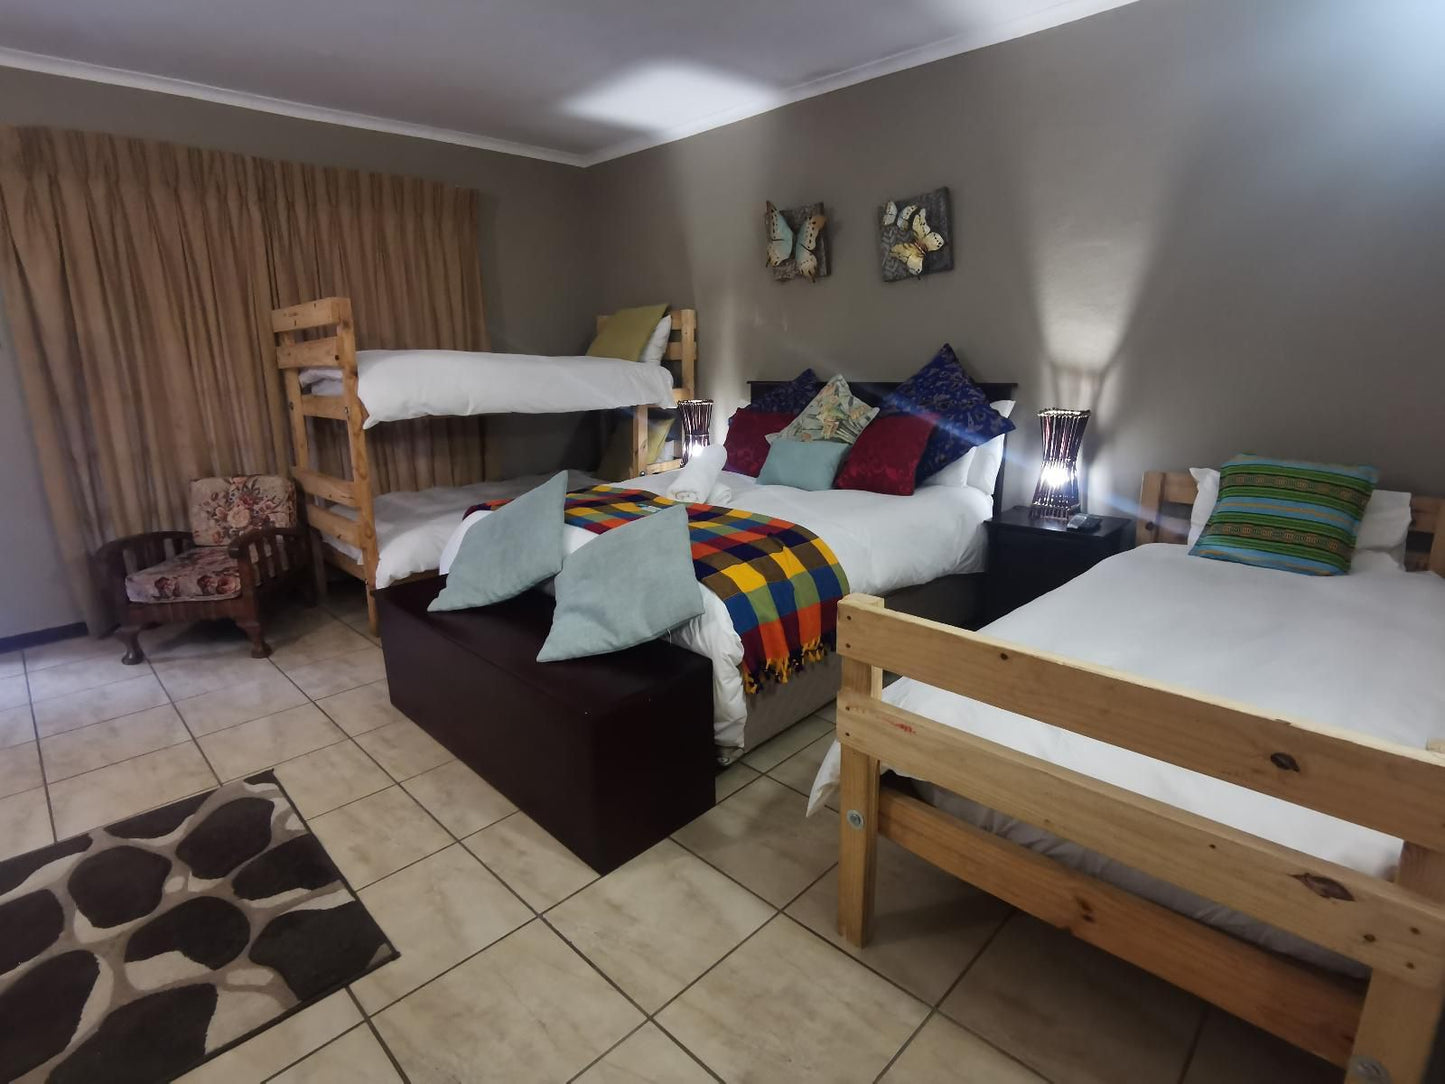 Majestic Deck Schoemansville Hartbeespoort North West Province South Africa Bedroom